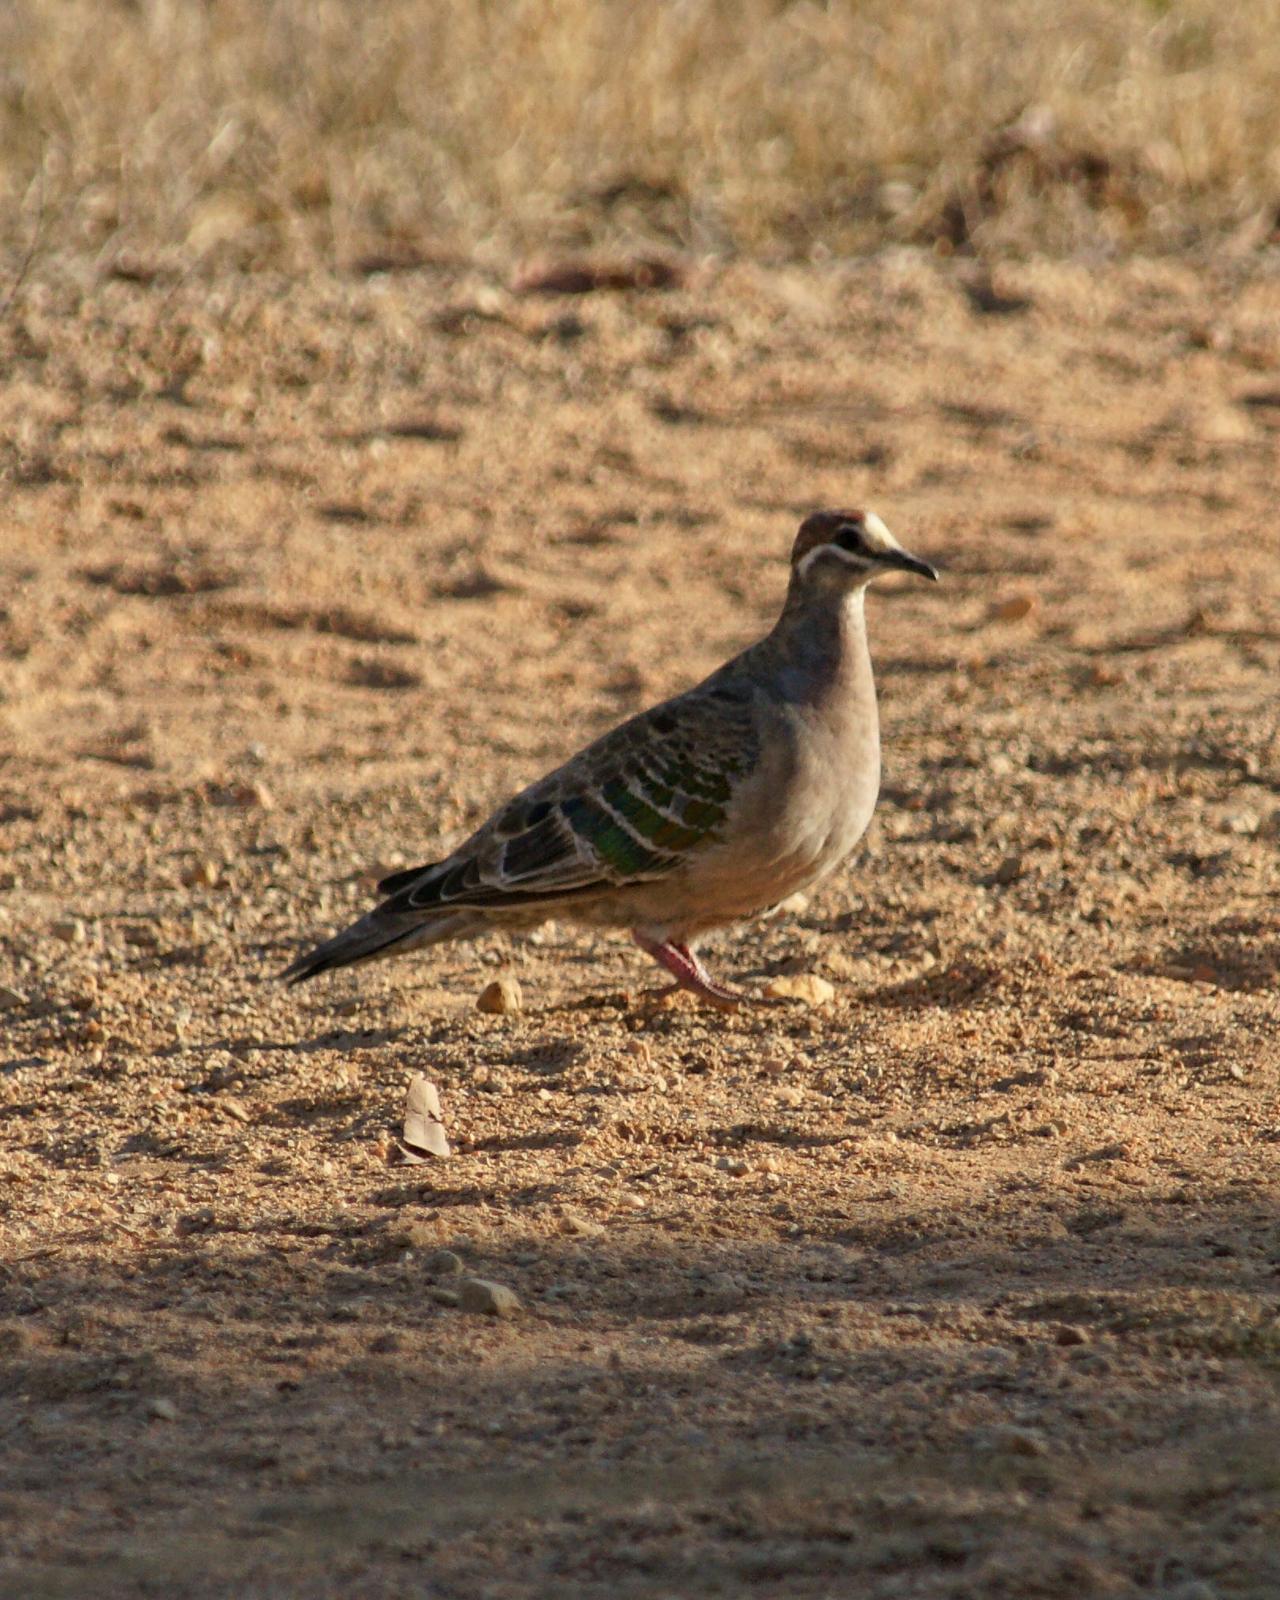 Common Bronzewing Photo by Steve Percival